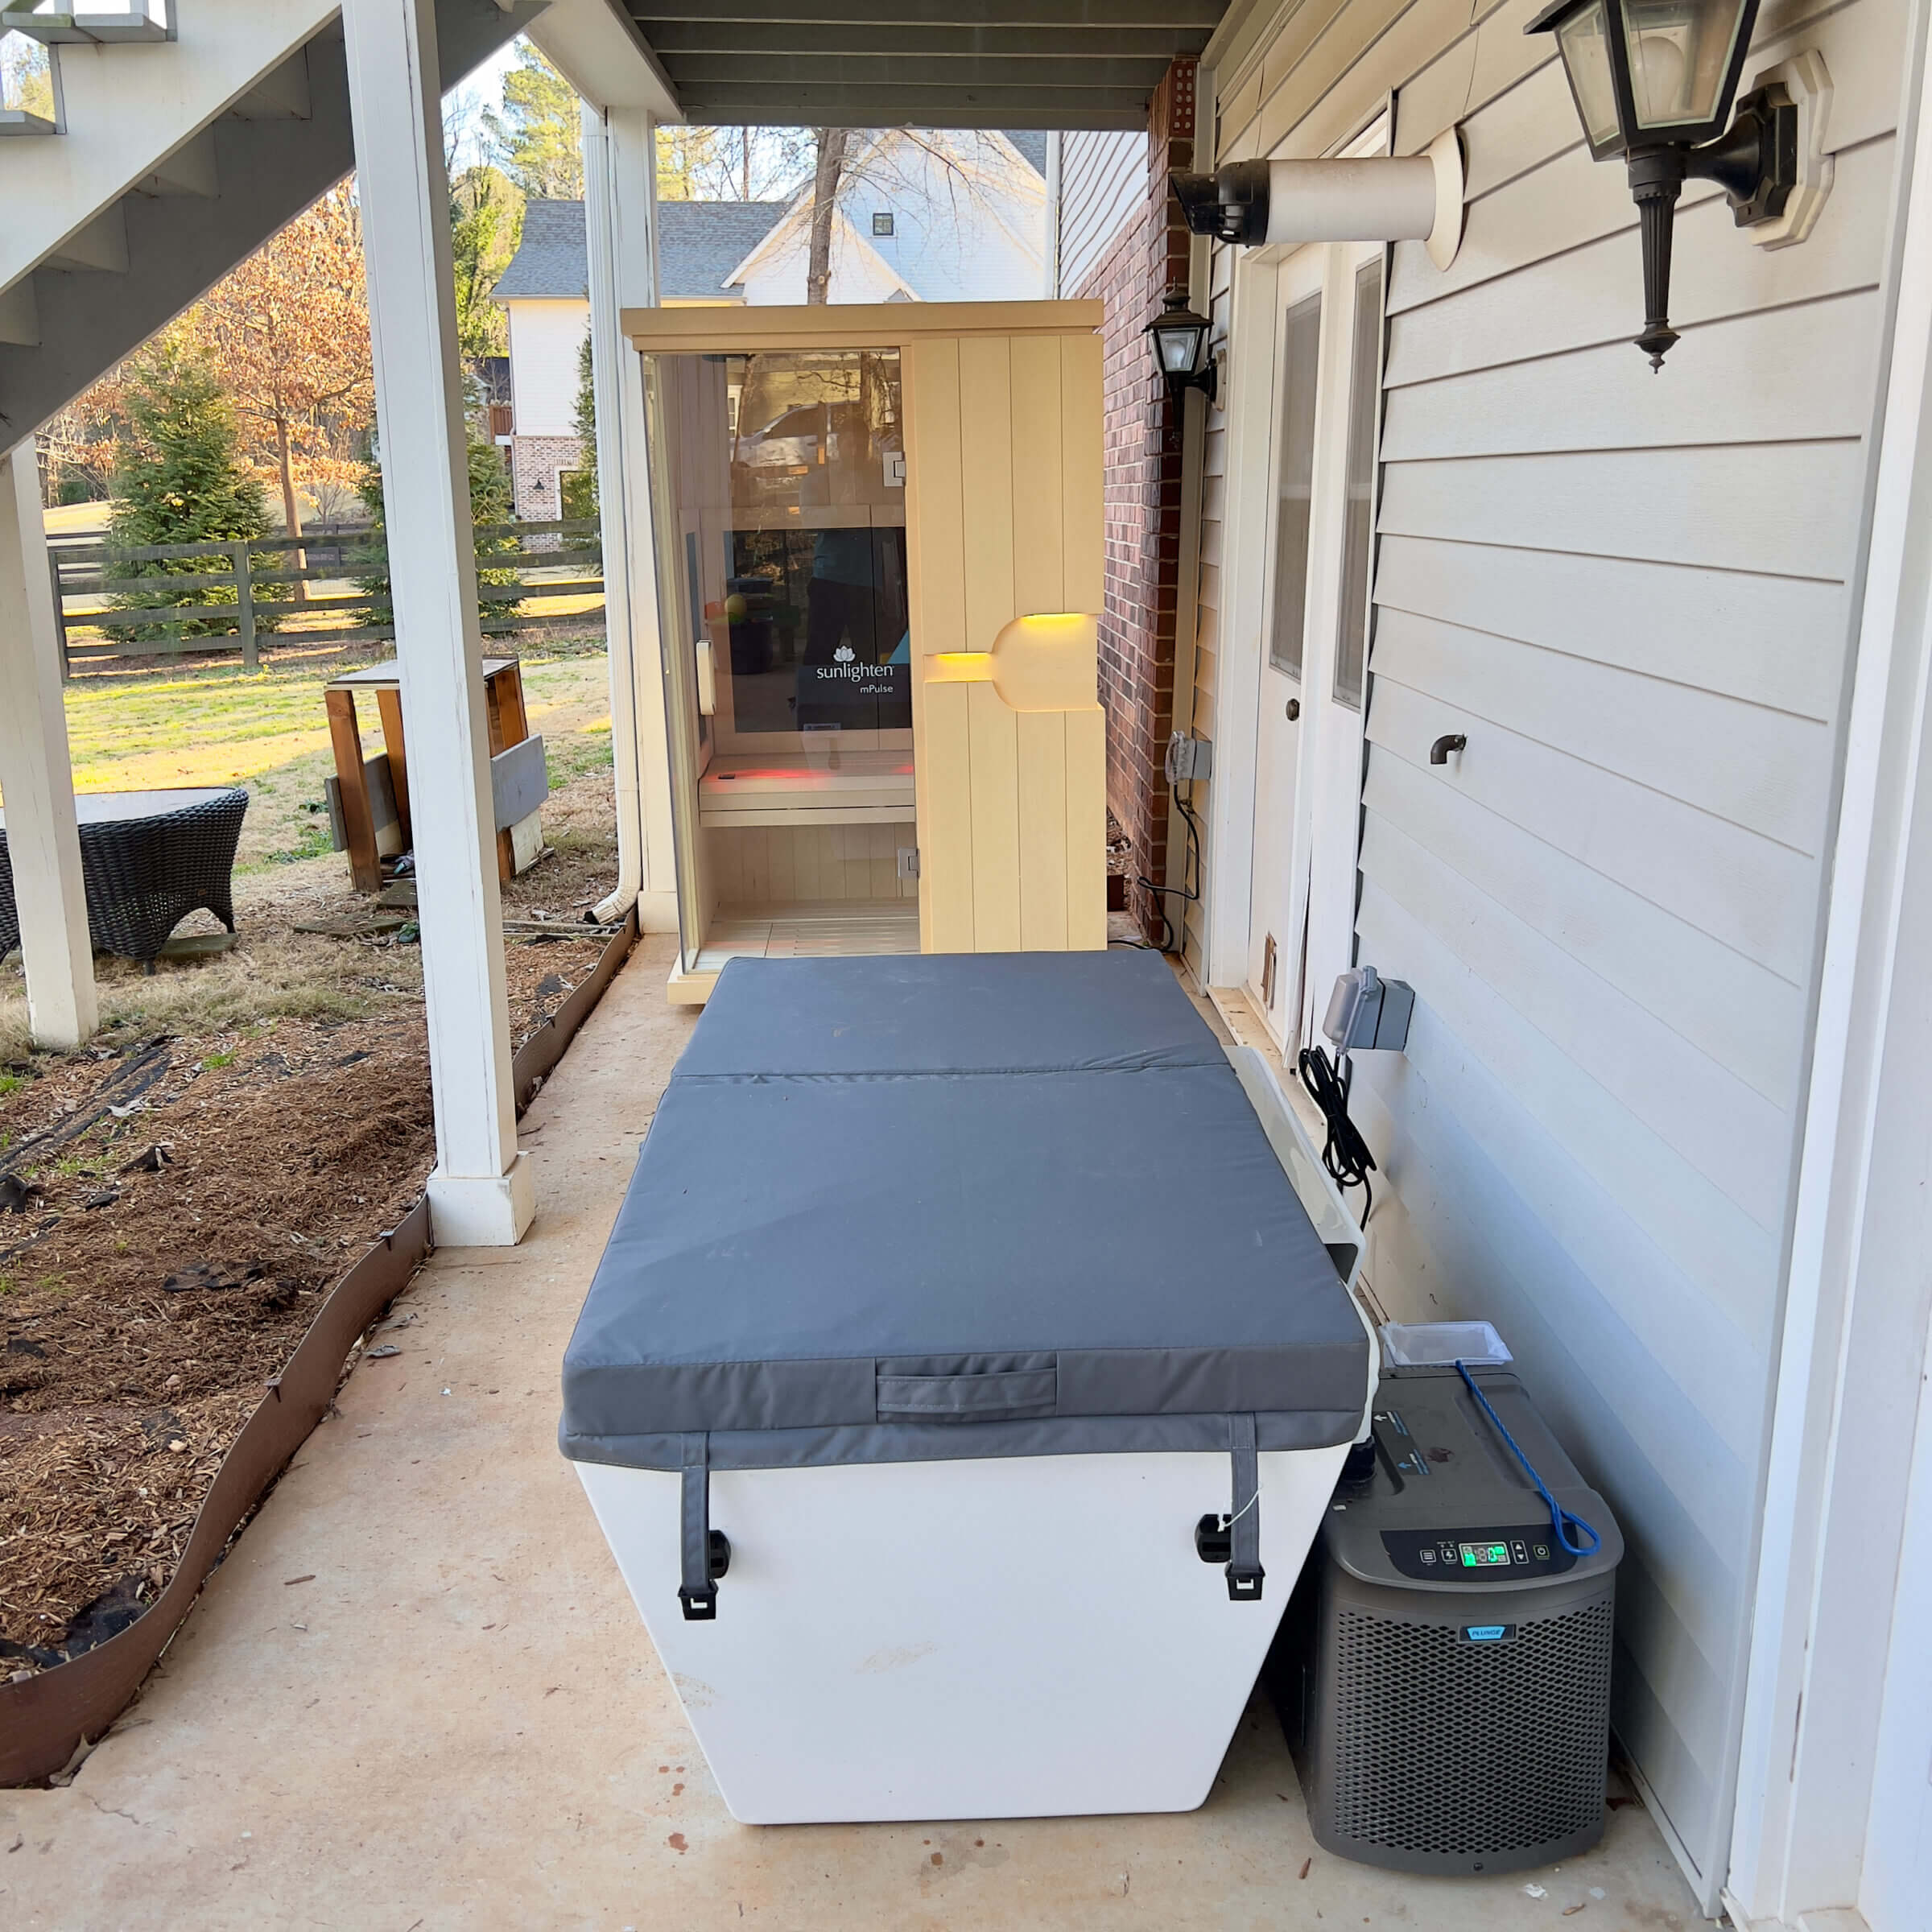 The Plunge fits perfectly on our back patio, beside our infrared sauna.